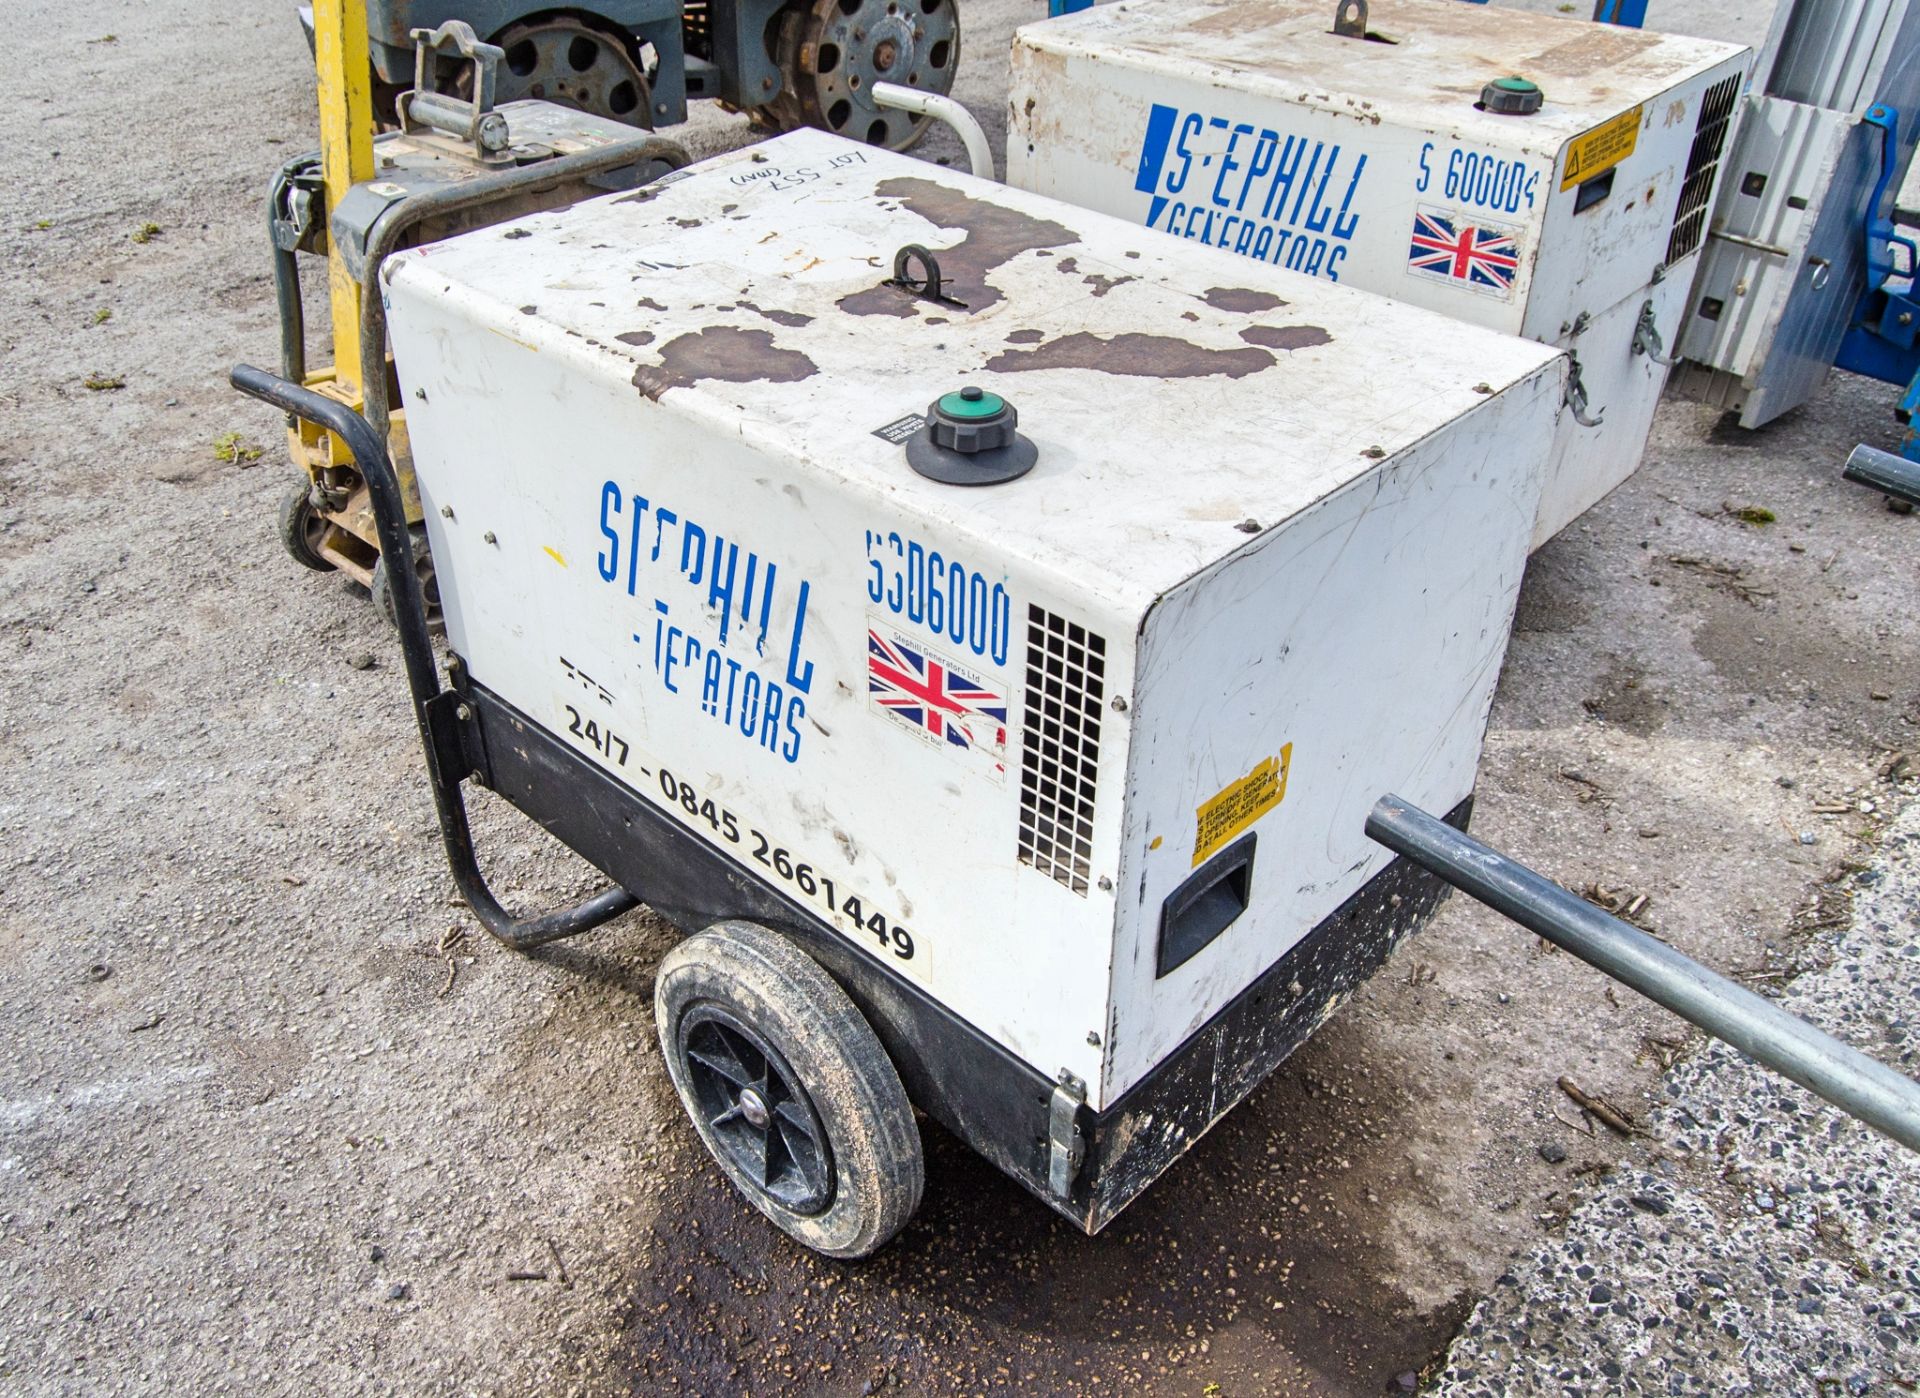 Stephill SSD6000 6 kva diesel driven generator Recorded Hours: 1101 A1142490 - Image 2 of 4